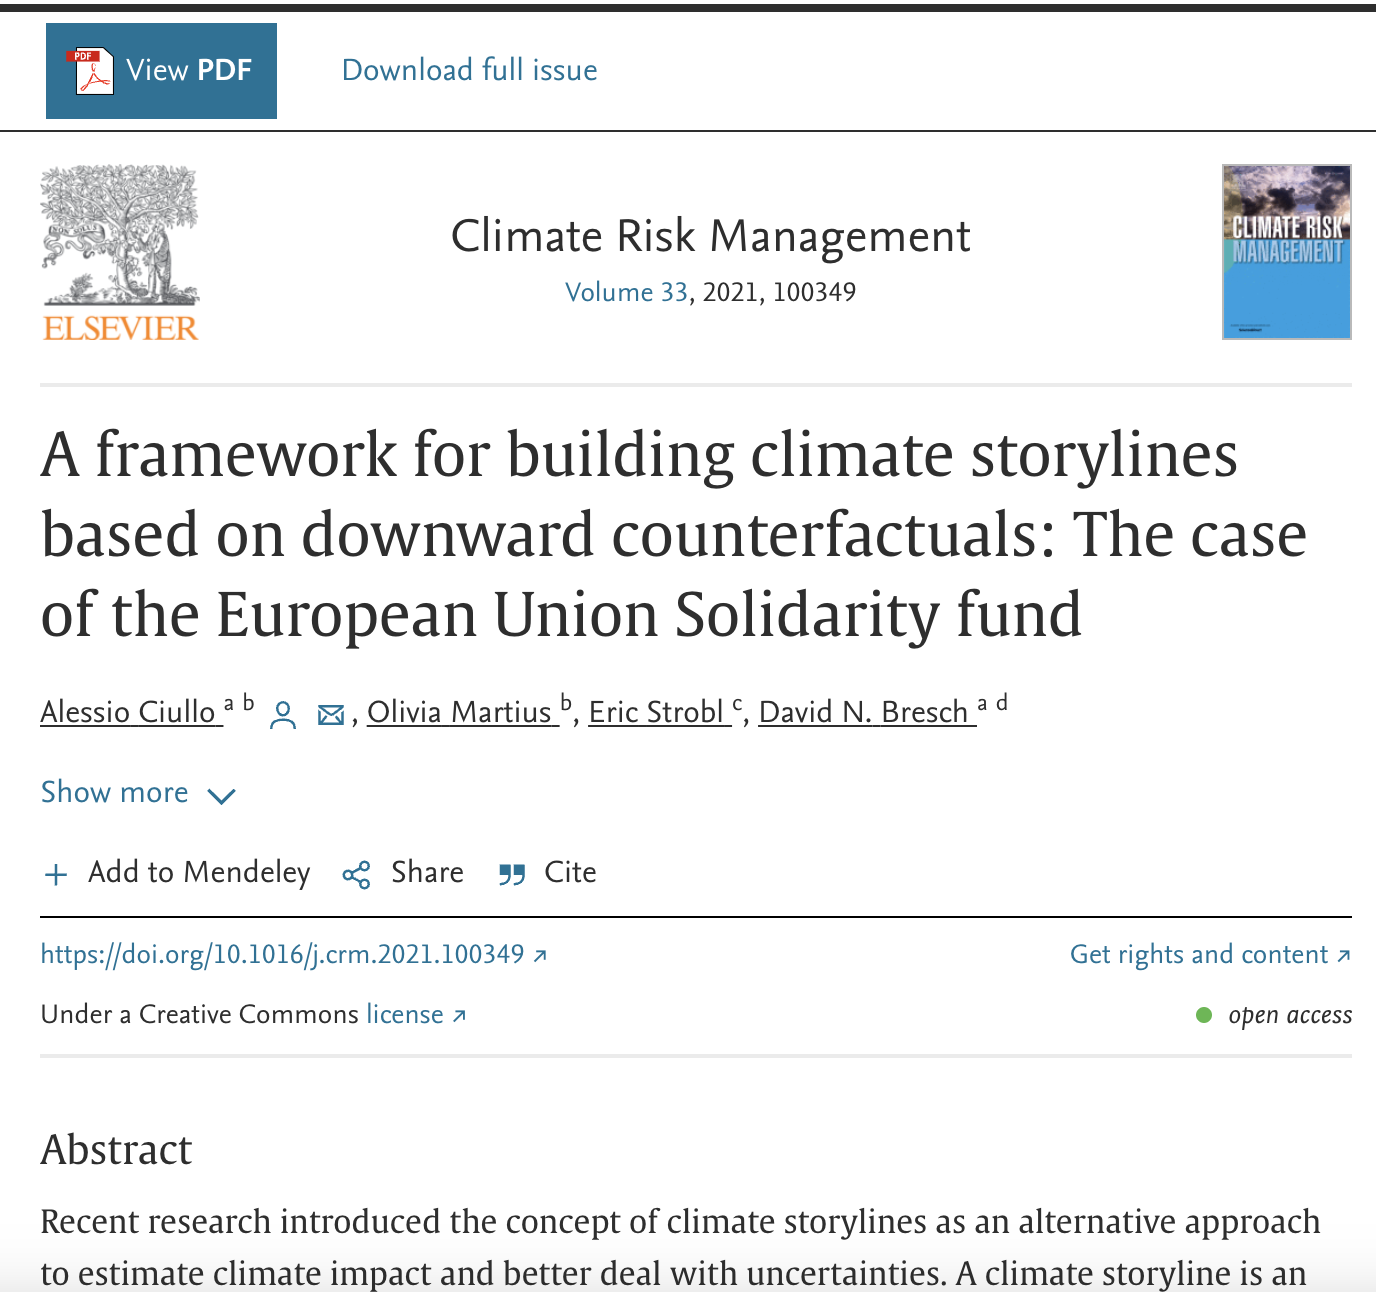 WP4 Financial impacts- A framework for building climate storylines based on downward counterfactuals: The case of the European Union Solidarity fund